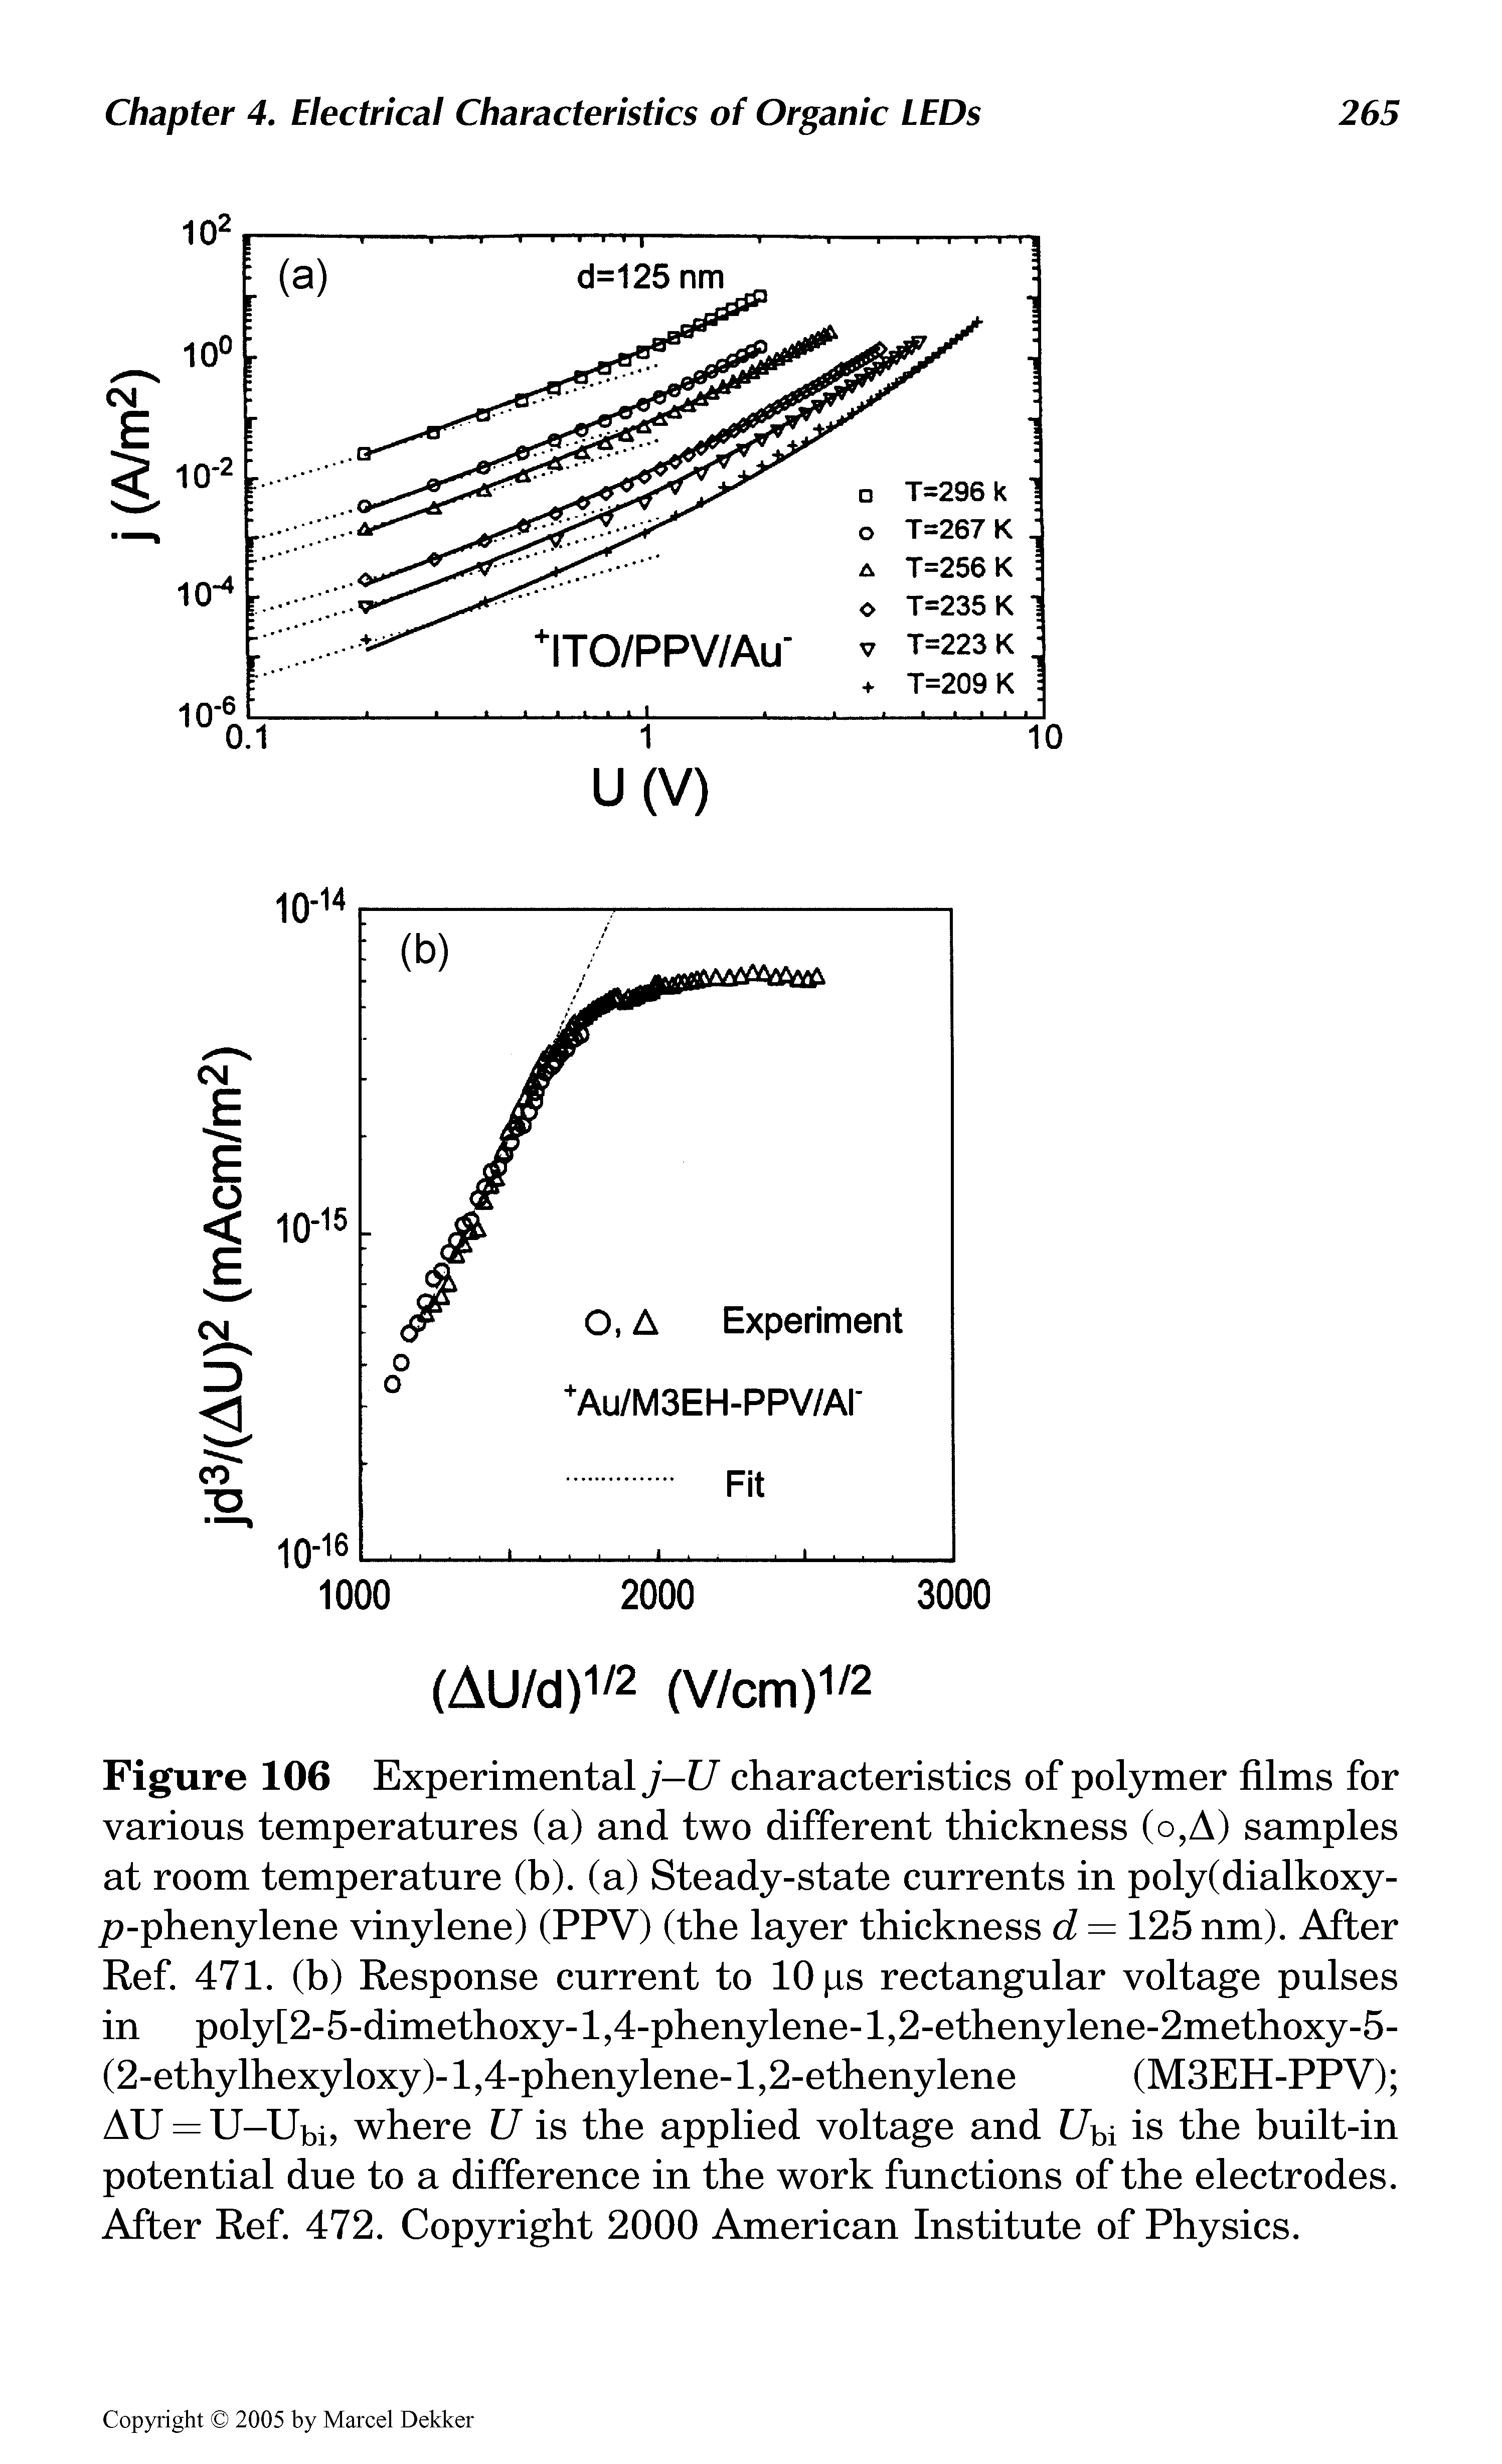 Figure 106 Experimental j—U characteristics of polymer films for various temperatures (a) and two different thickness (o,A) samples at room temperature (b). (a) Steady-state currents in poly(dialkoxy-p-phenylene vinylene) (PPV) (the layer thickness d = 125 nm). After Ref. 471. (b) Response current to 10 ps rectangular voltage pulses in poly[2-5-dimethoxy-l,4-phenylene-l,2-ethenylene-2methoxy-5-(2-ethylhexyloxy)-l,4-phenylene-l,2-ethenylene (M3EH-PPV) AU = U-Ubi, where U is the applied voltage and f/bi is the built-in potential due to a difference in the work functions of the electrodes. After Ref. 472. Copyright 2000 American Institute of Physics.